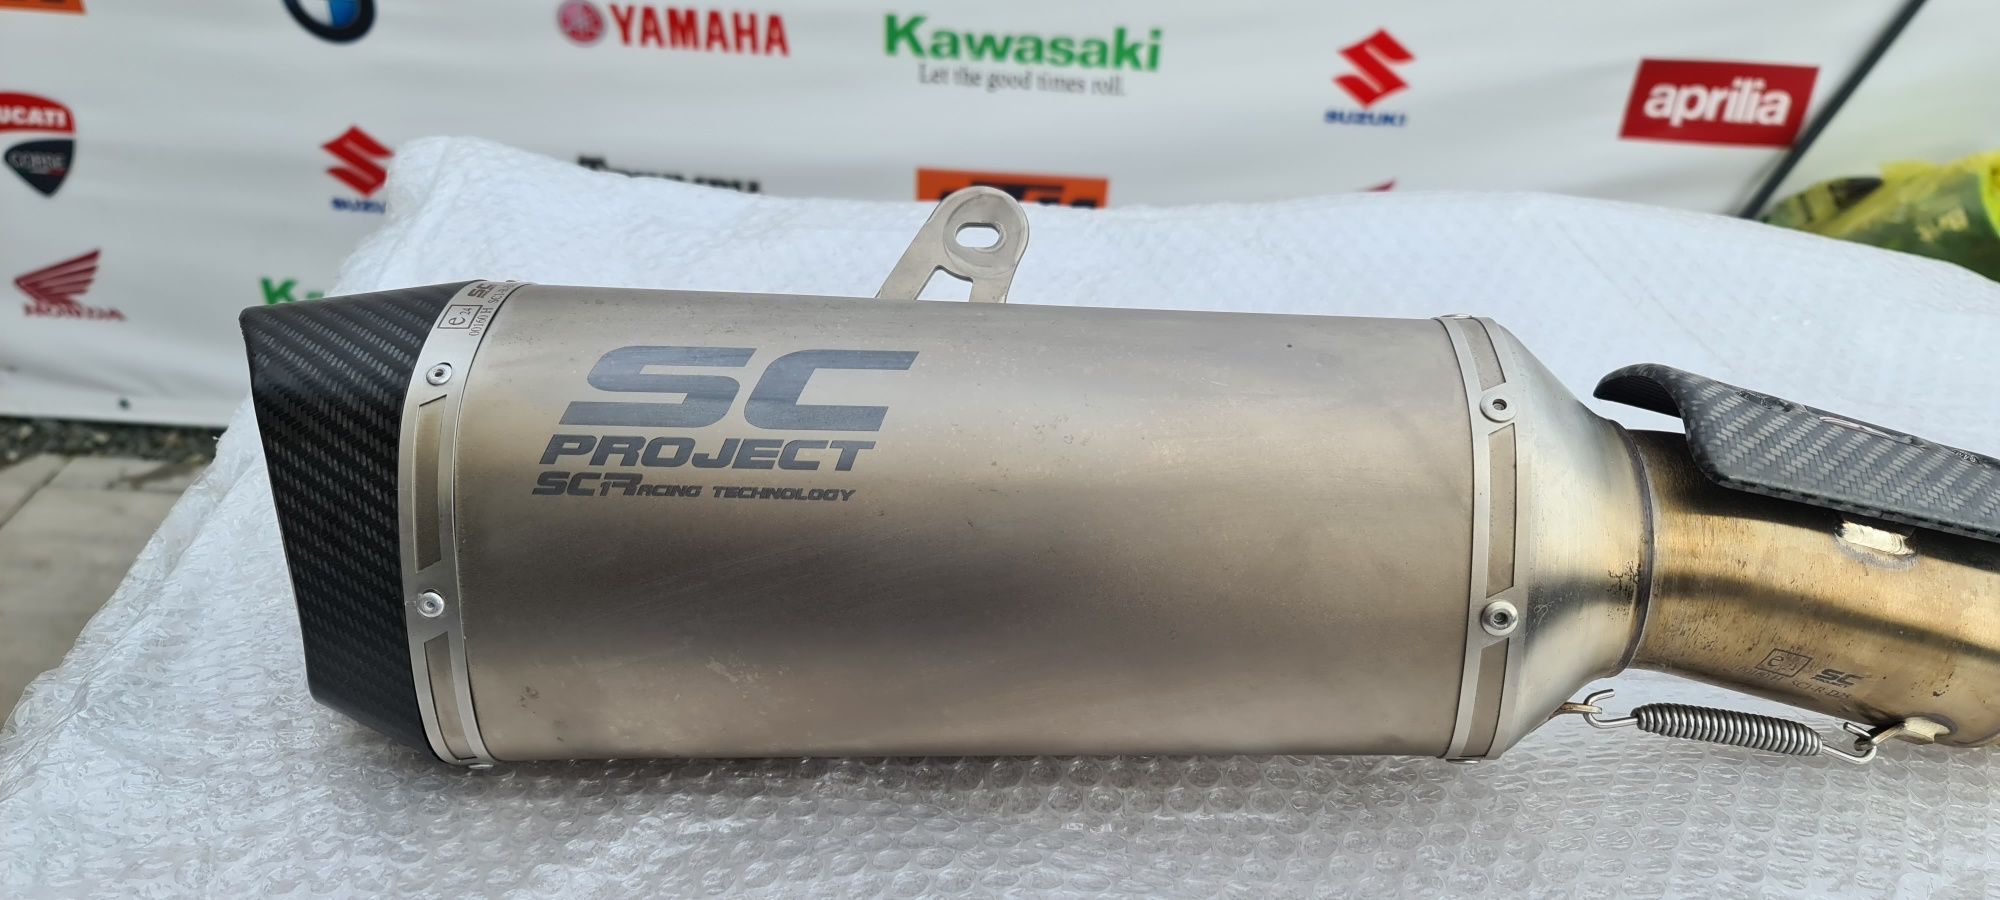 Toba evacuare sport Ducati Monster 821 SC Project SC1 R / piese